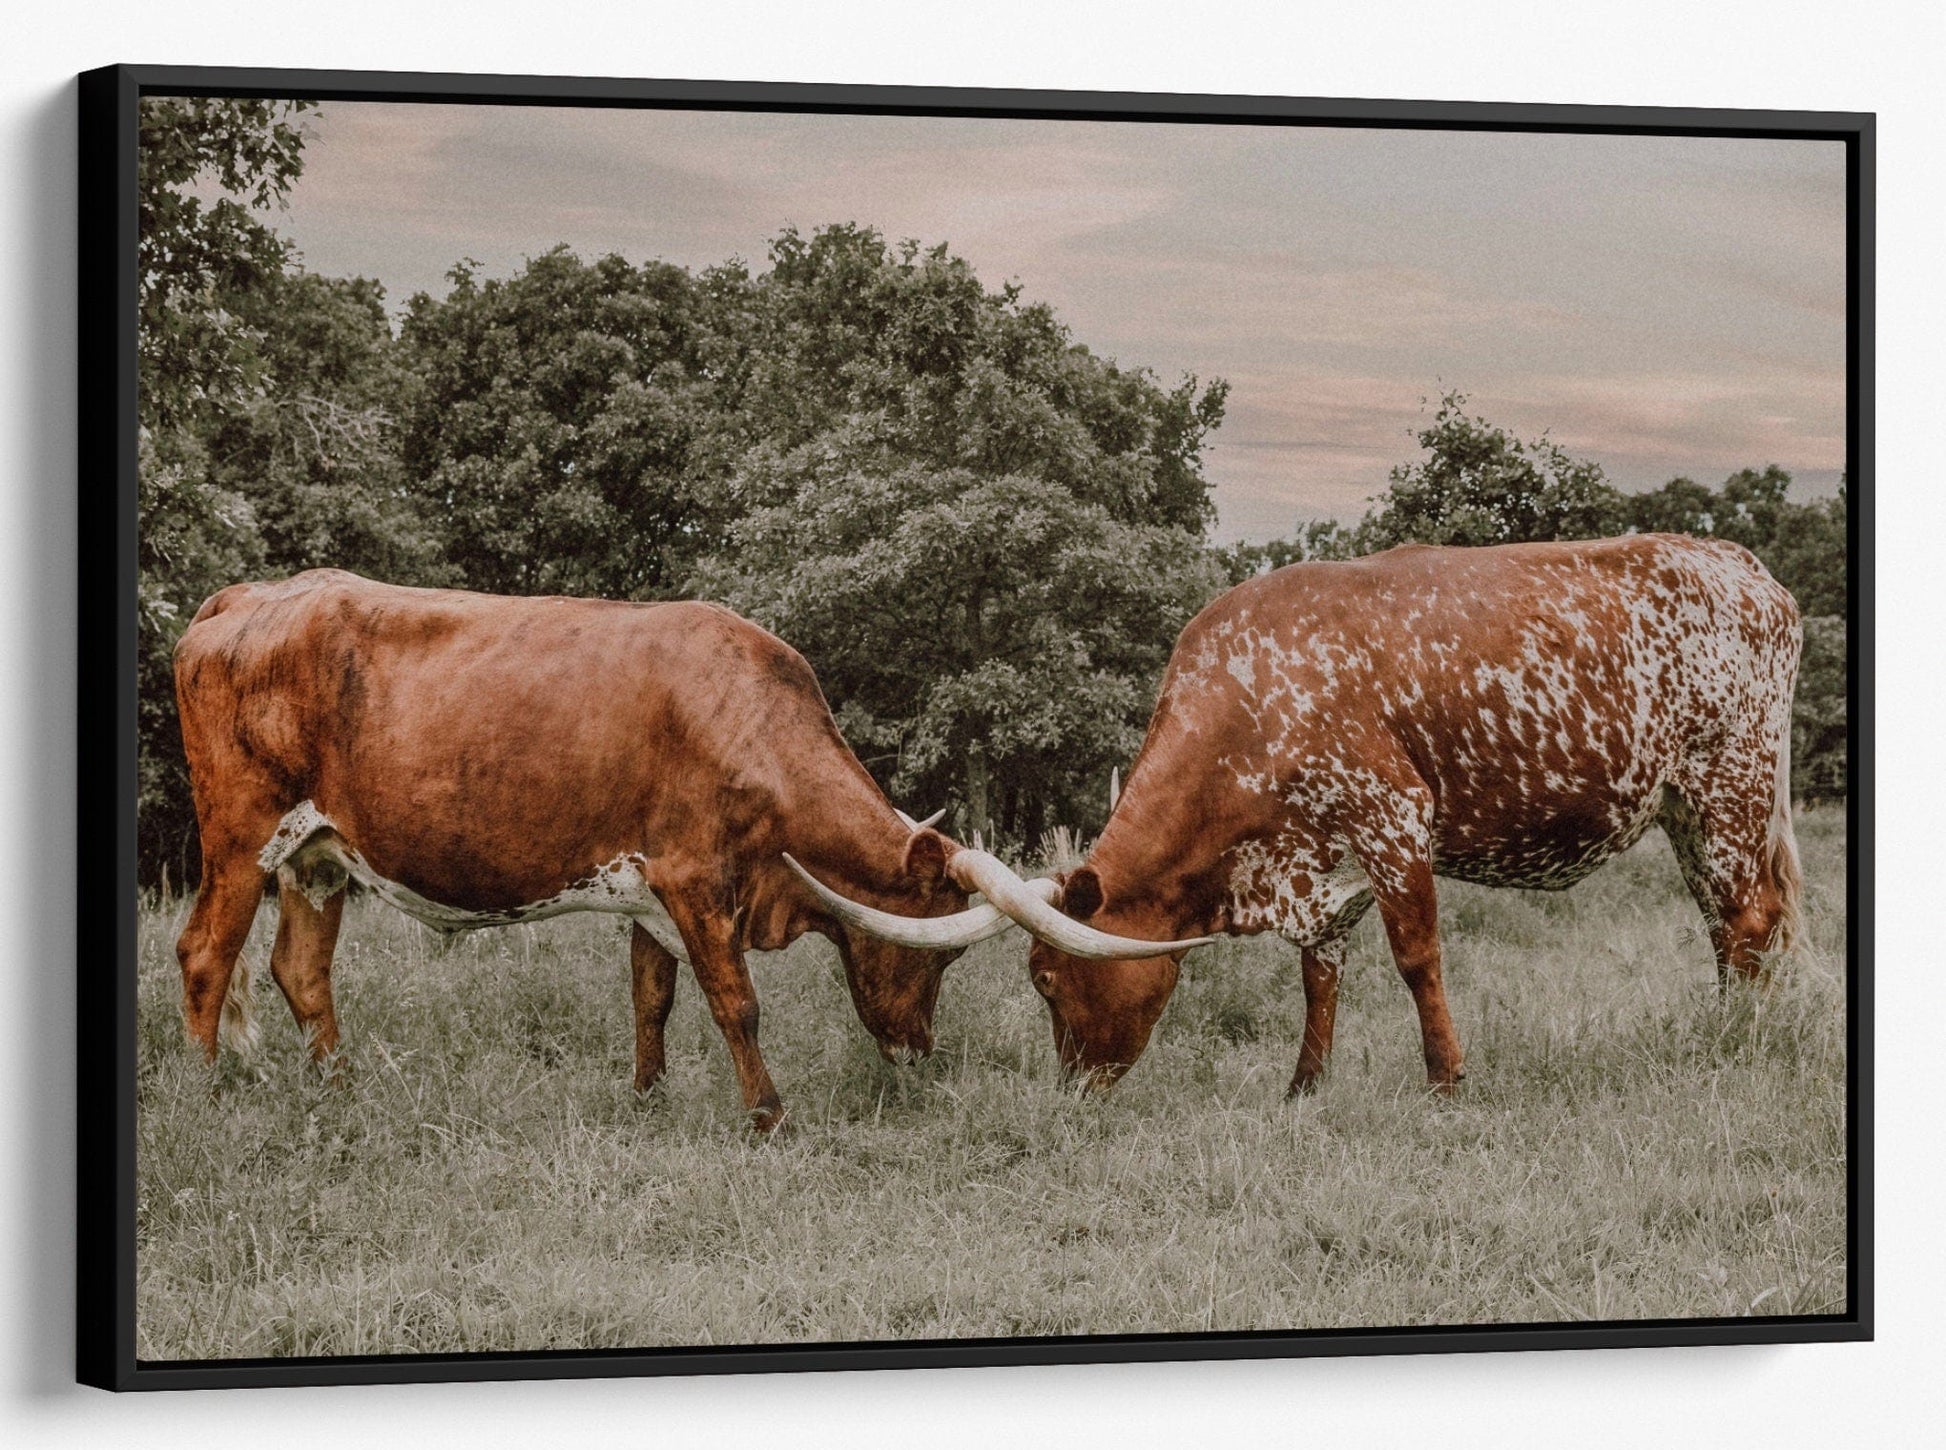 Texas Longhorn Cattle Wall Art in Muted Colors Canvas-Black Frame / 12 x 18 Inches Wall Art Teri James Photography